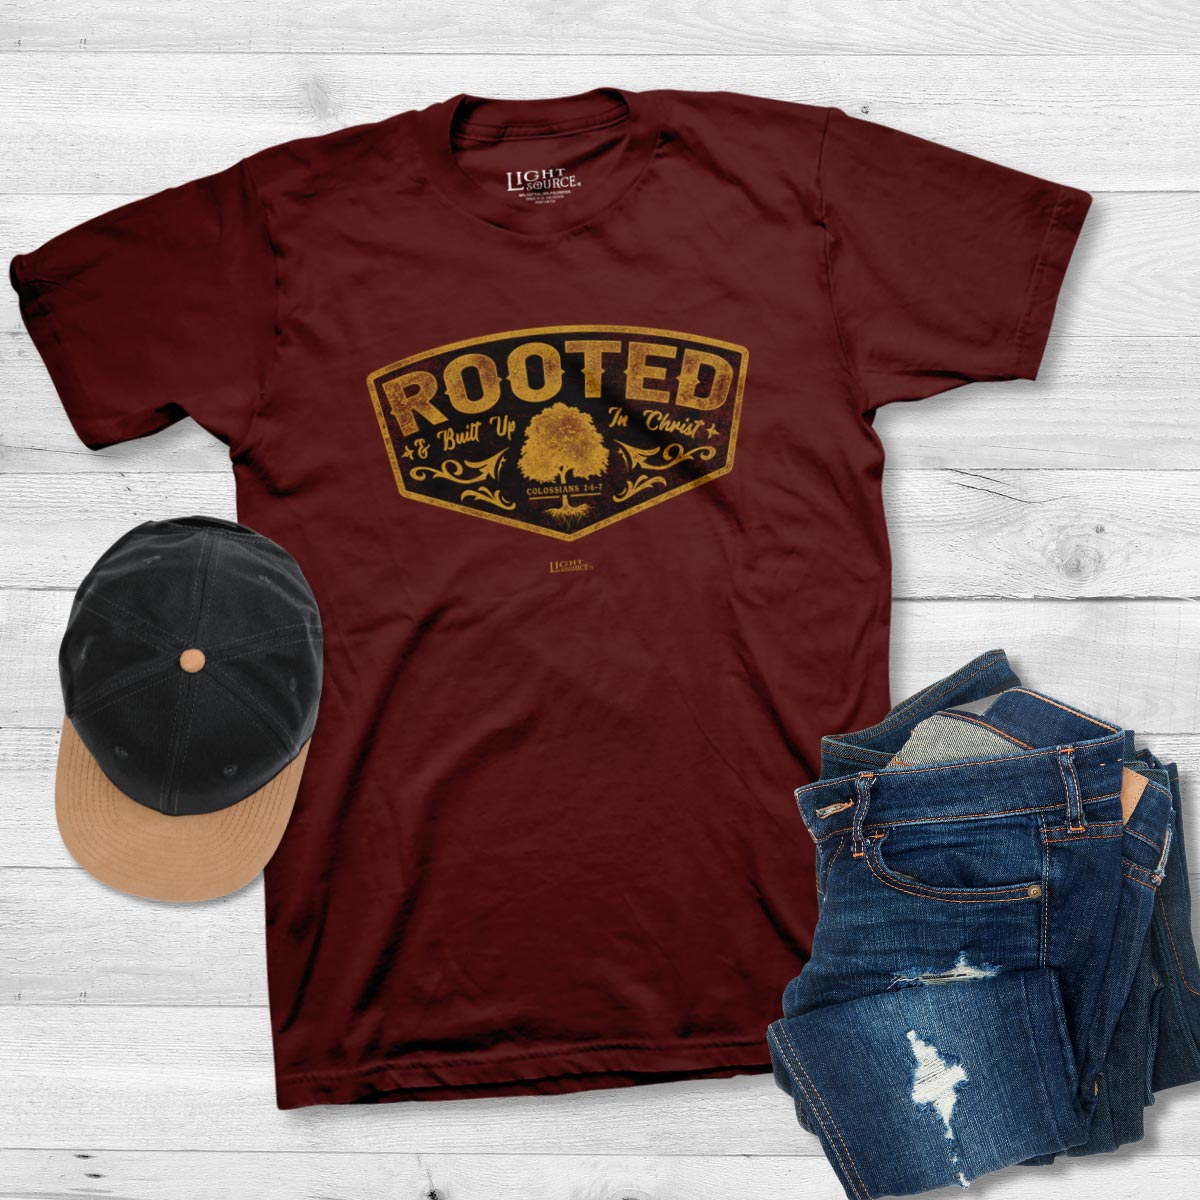 Light Source Mens T-Shirt Rooted Crest